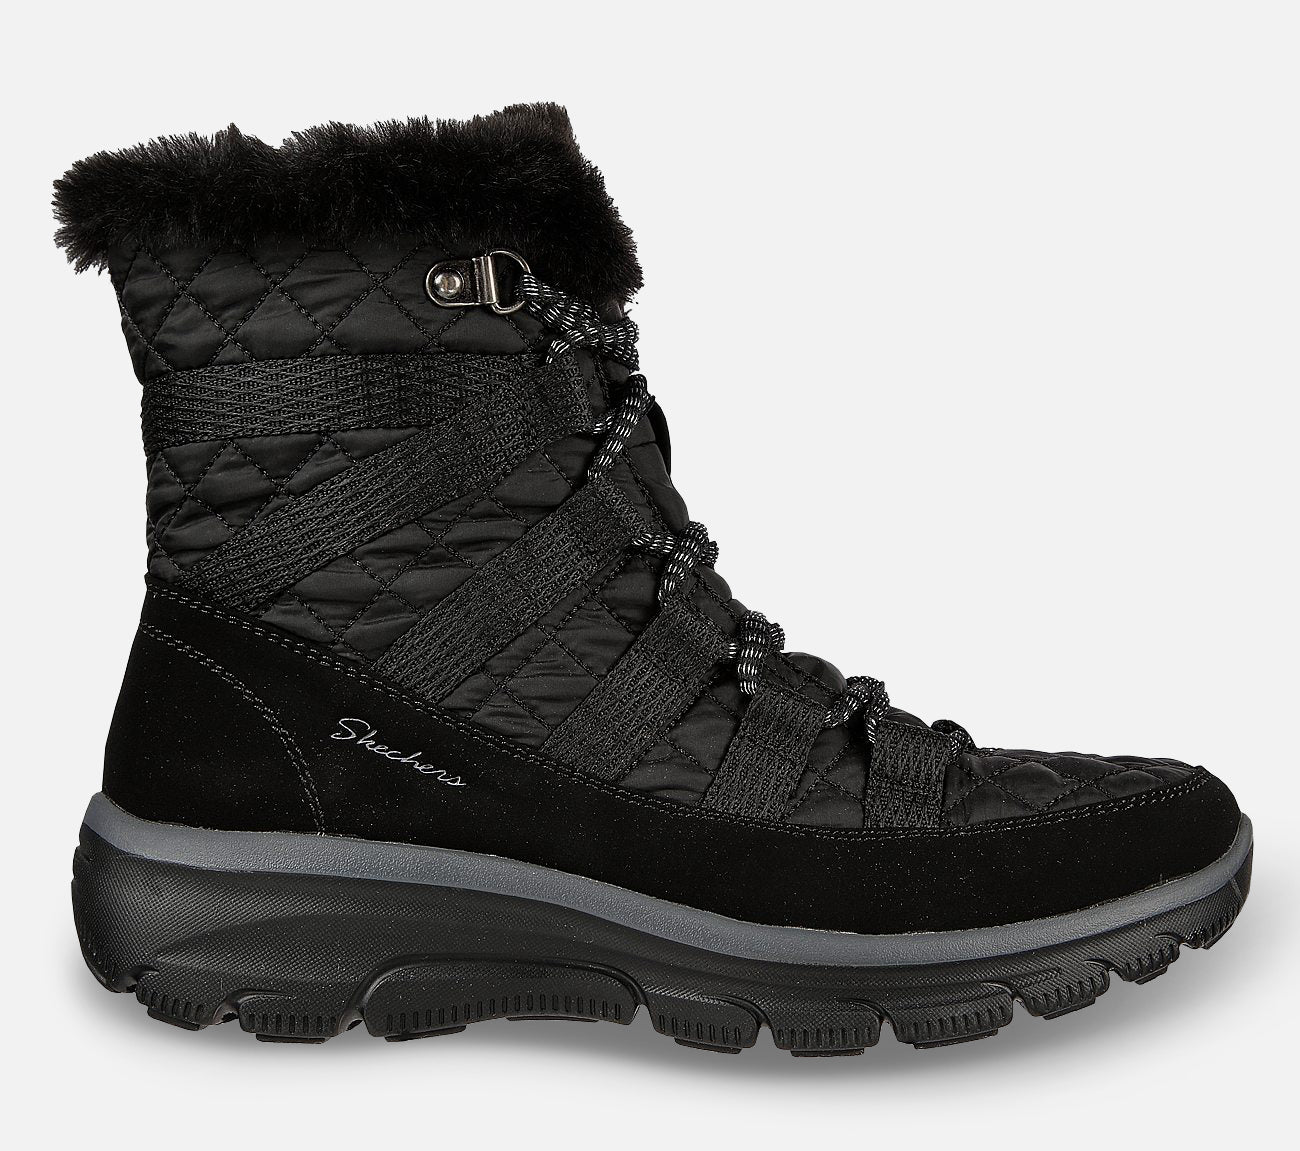 Relaxed Fit - Easy Going Boot Skechers